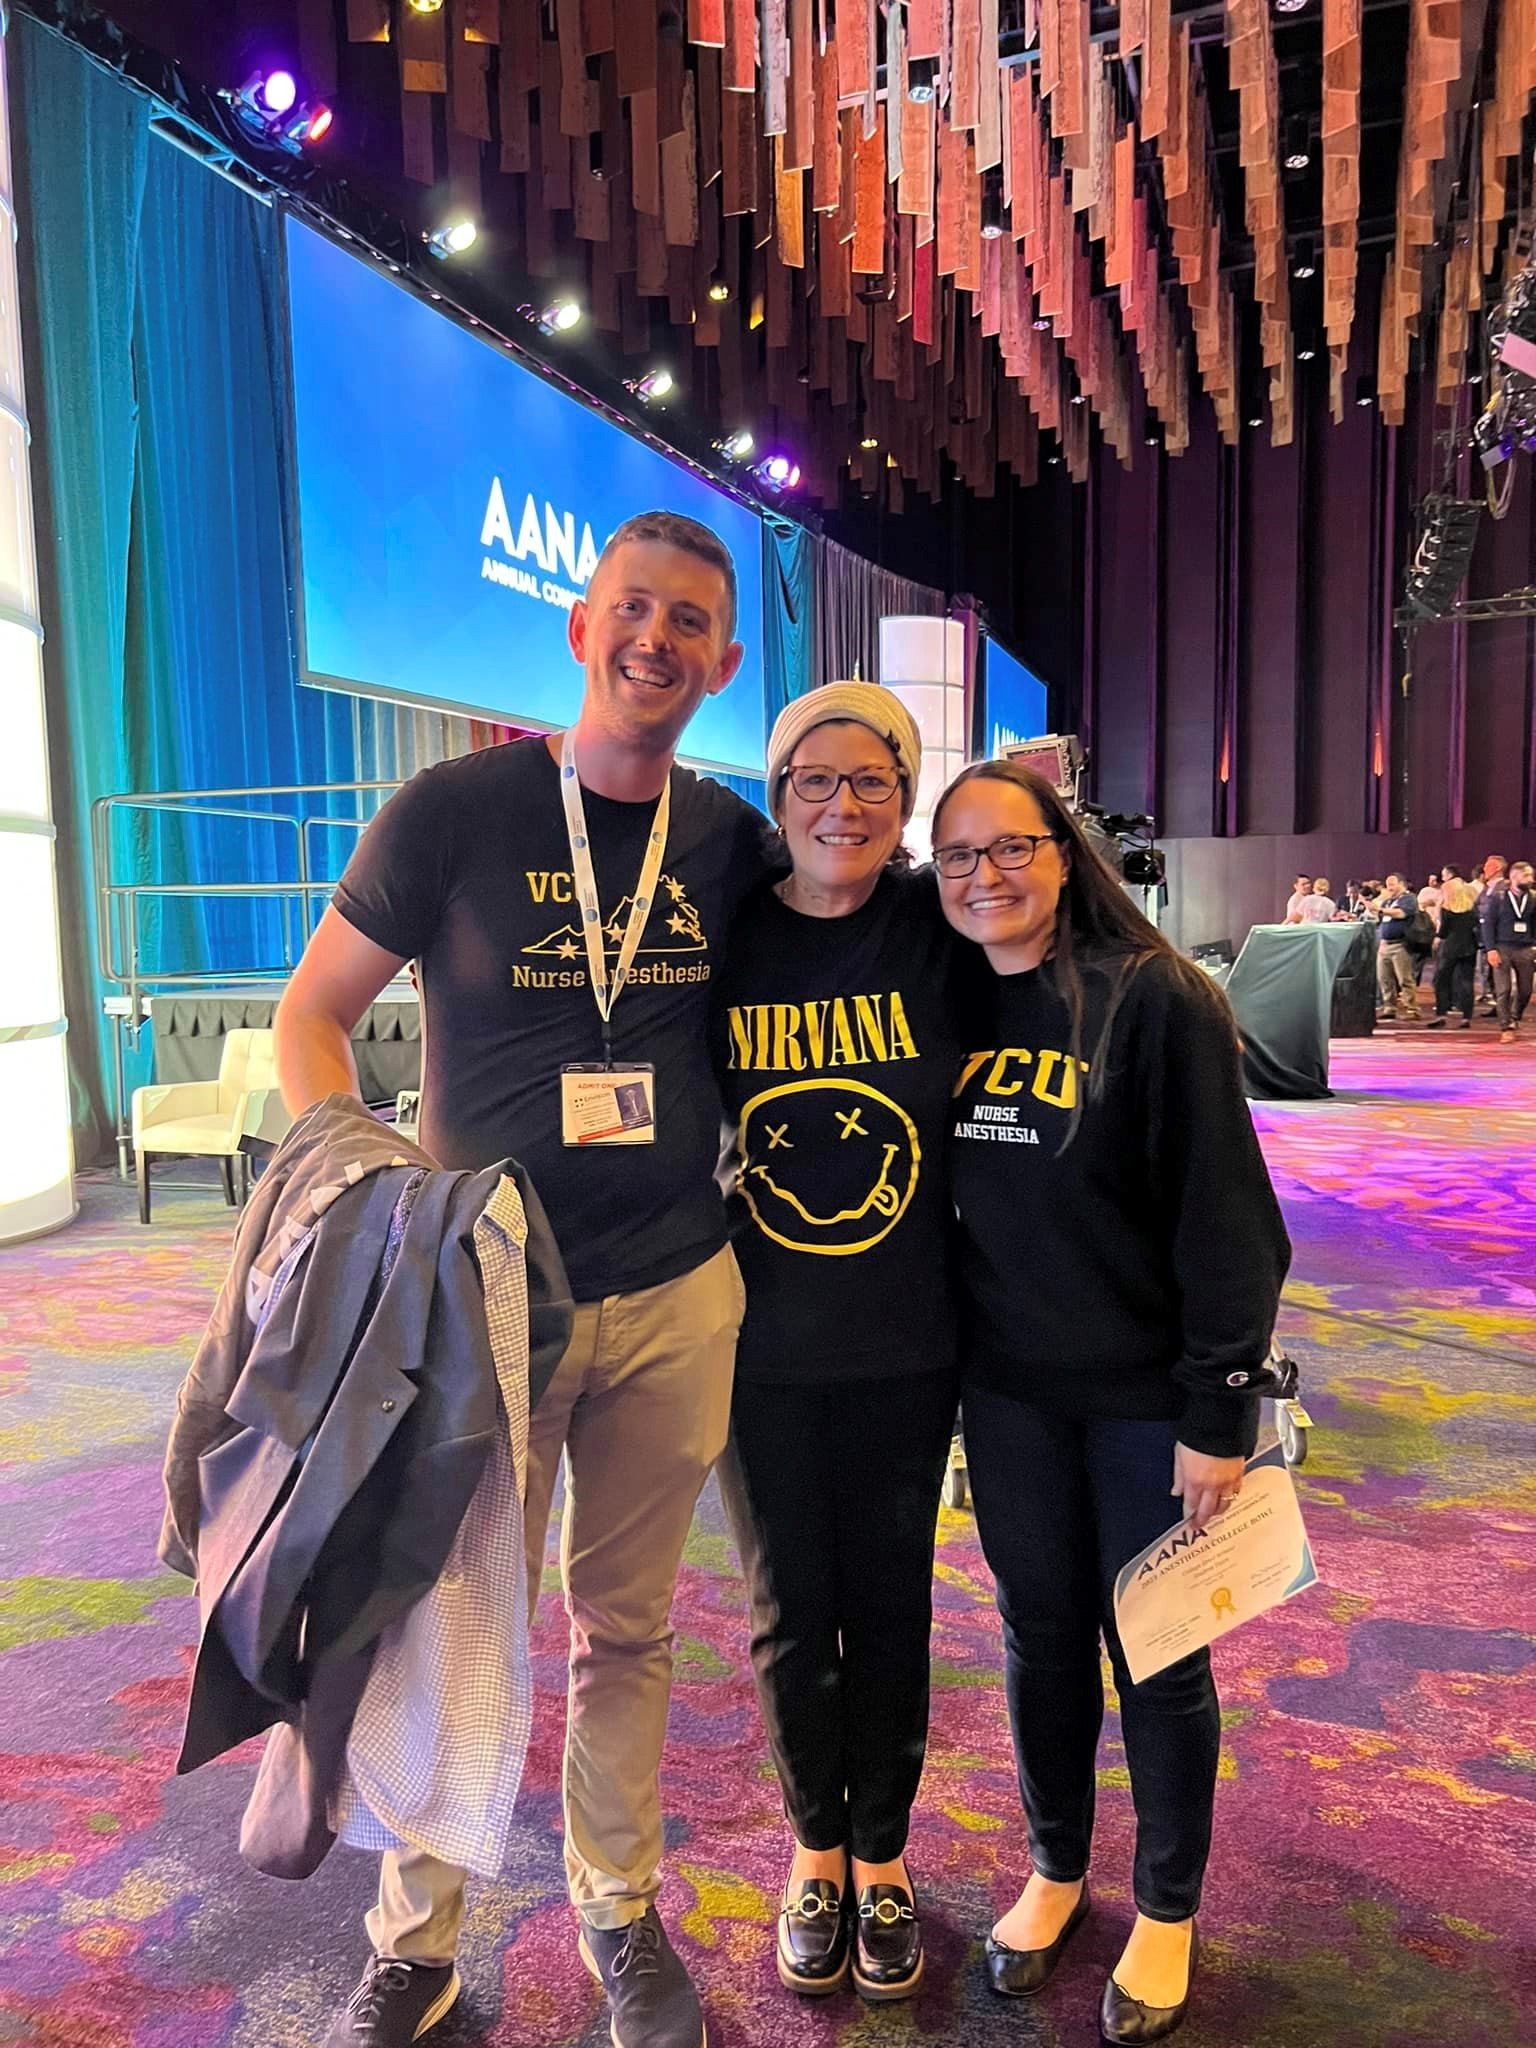 Carolyn Milander and colleagus at the 2023 AANA Congress